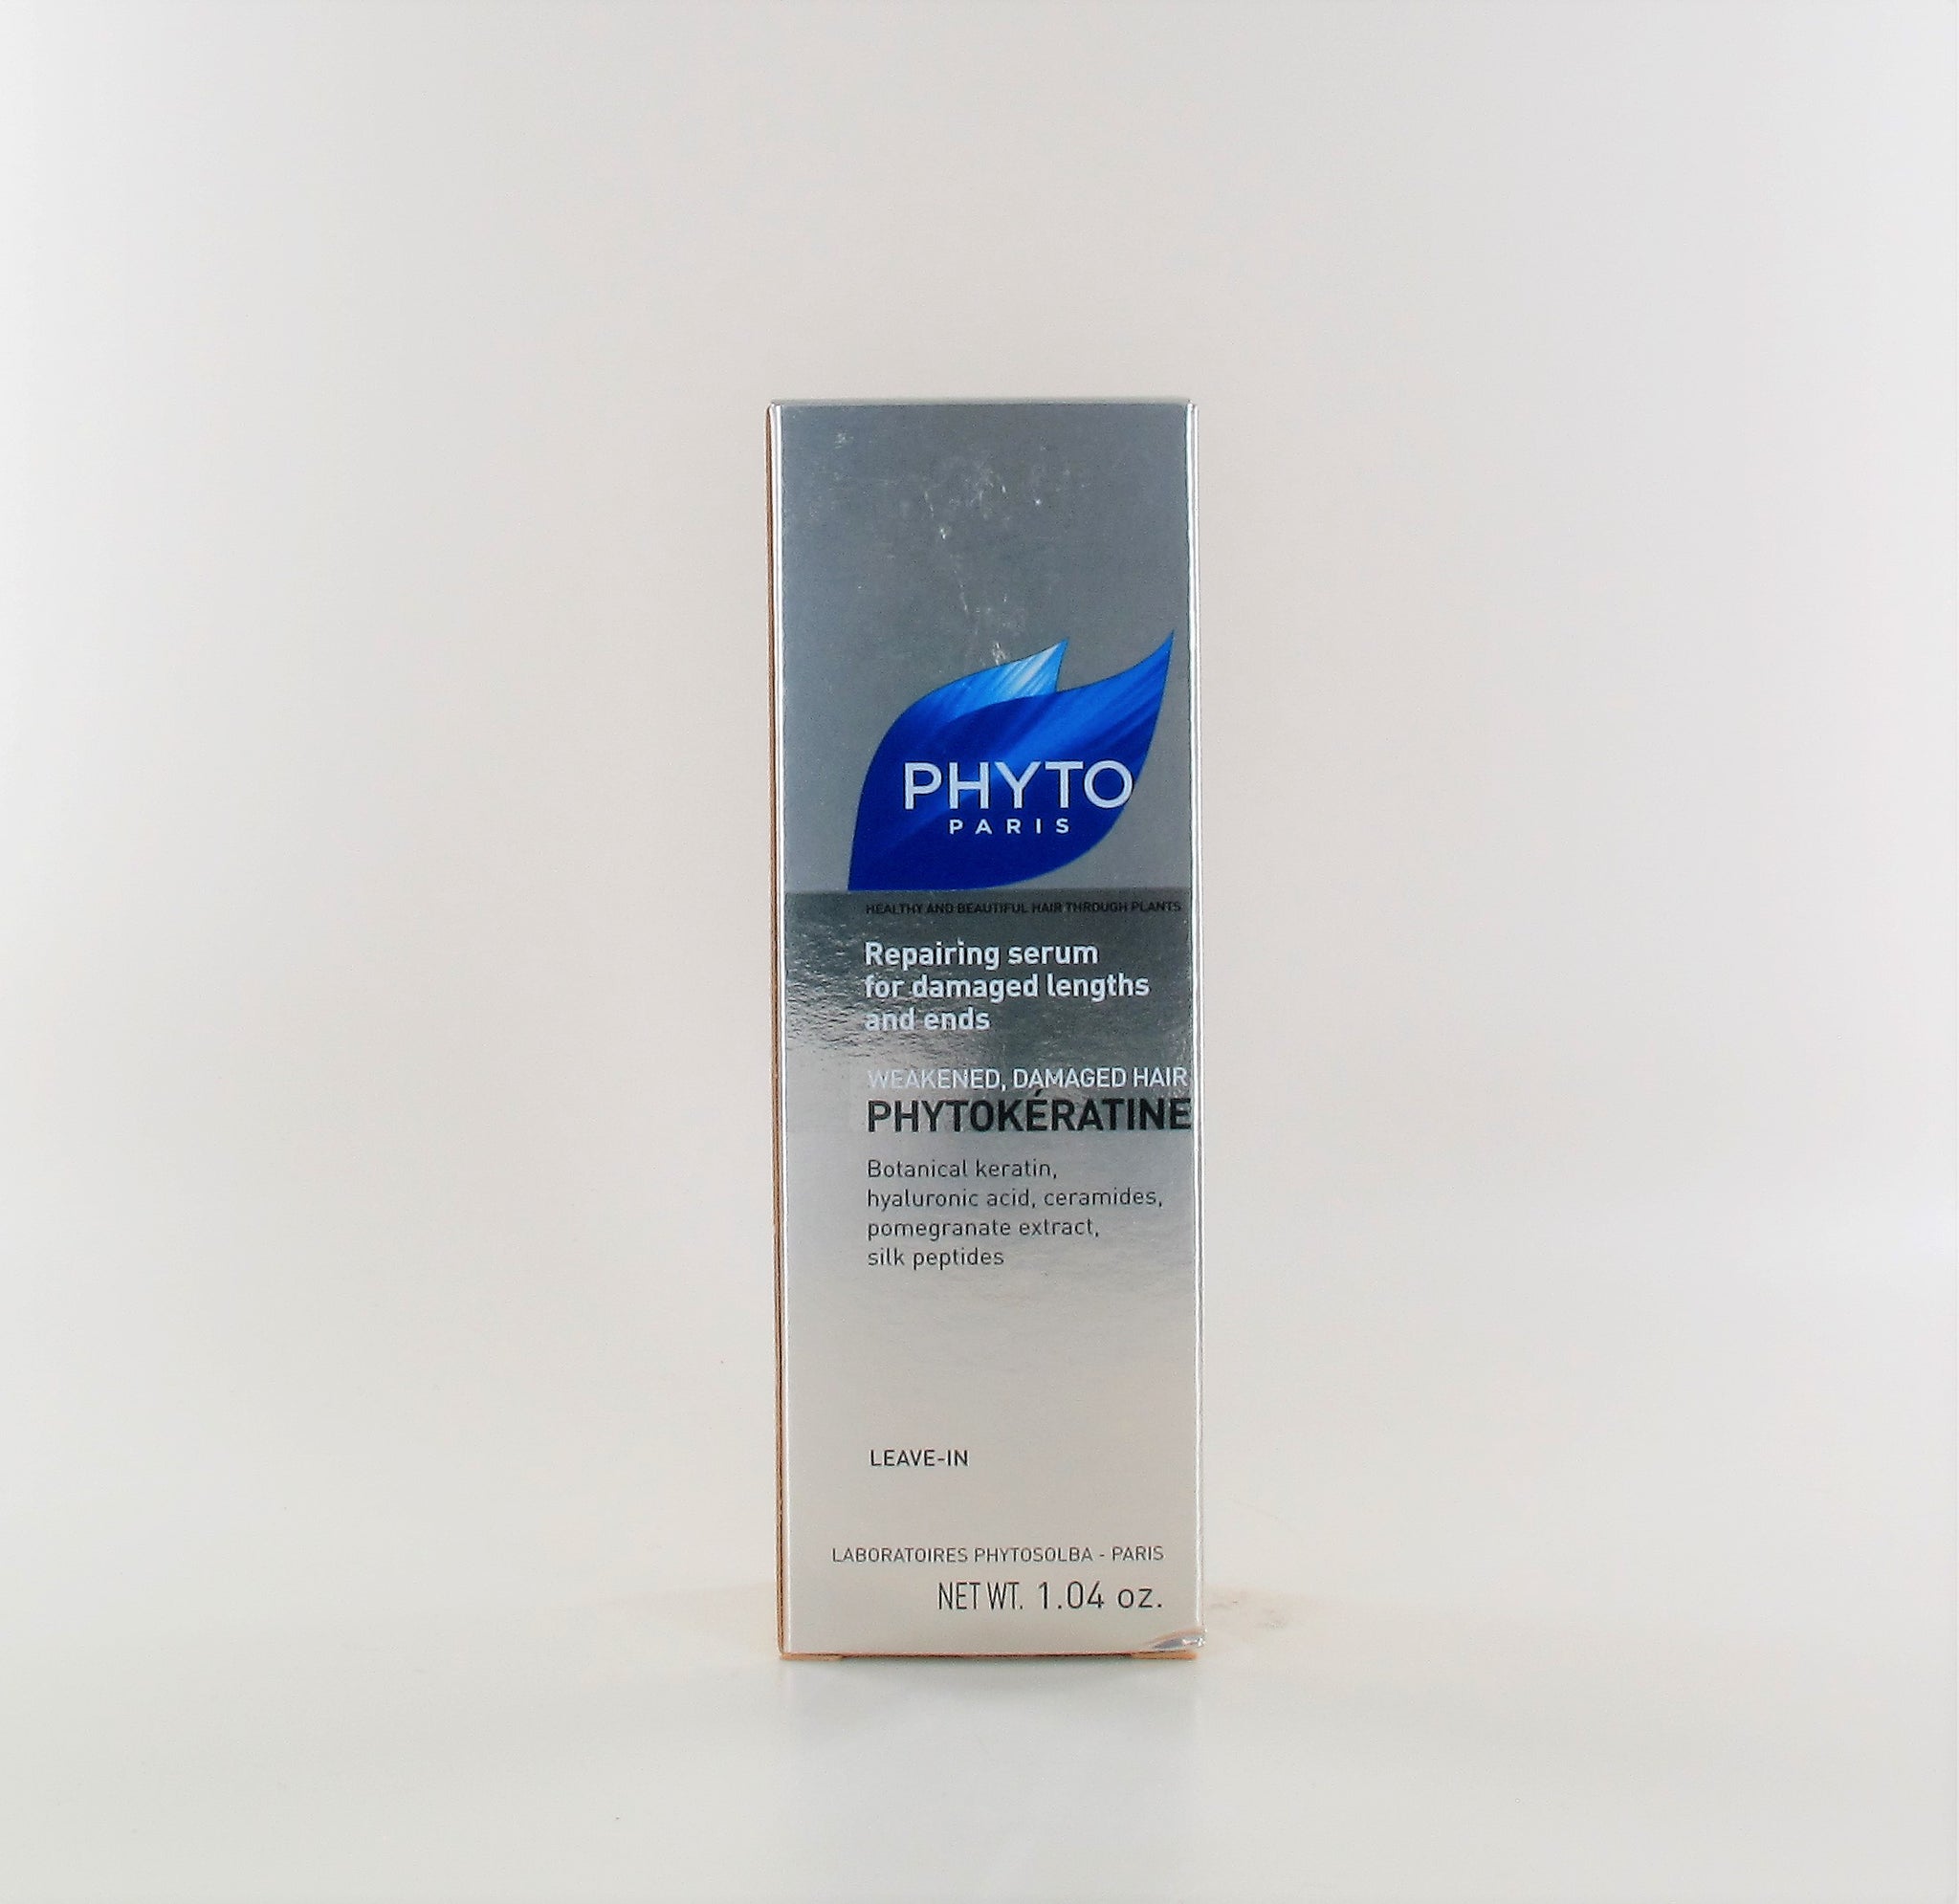 Phyto Paris Phytokeratine Repairing Serum For Damaged Lengths And Ends 1.04 Oz